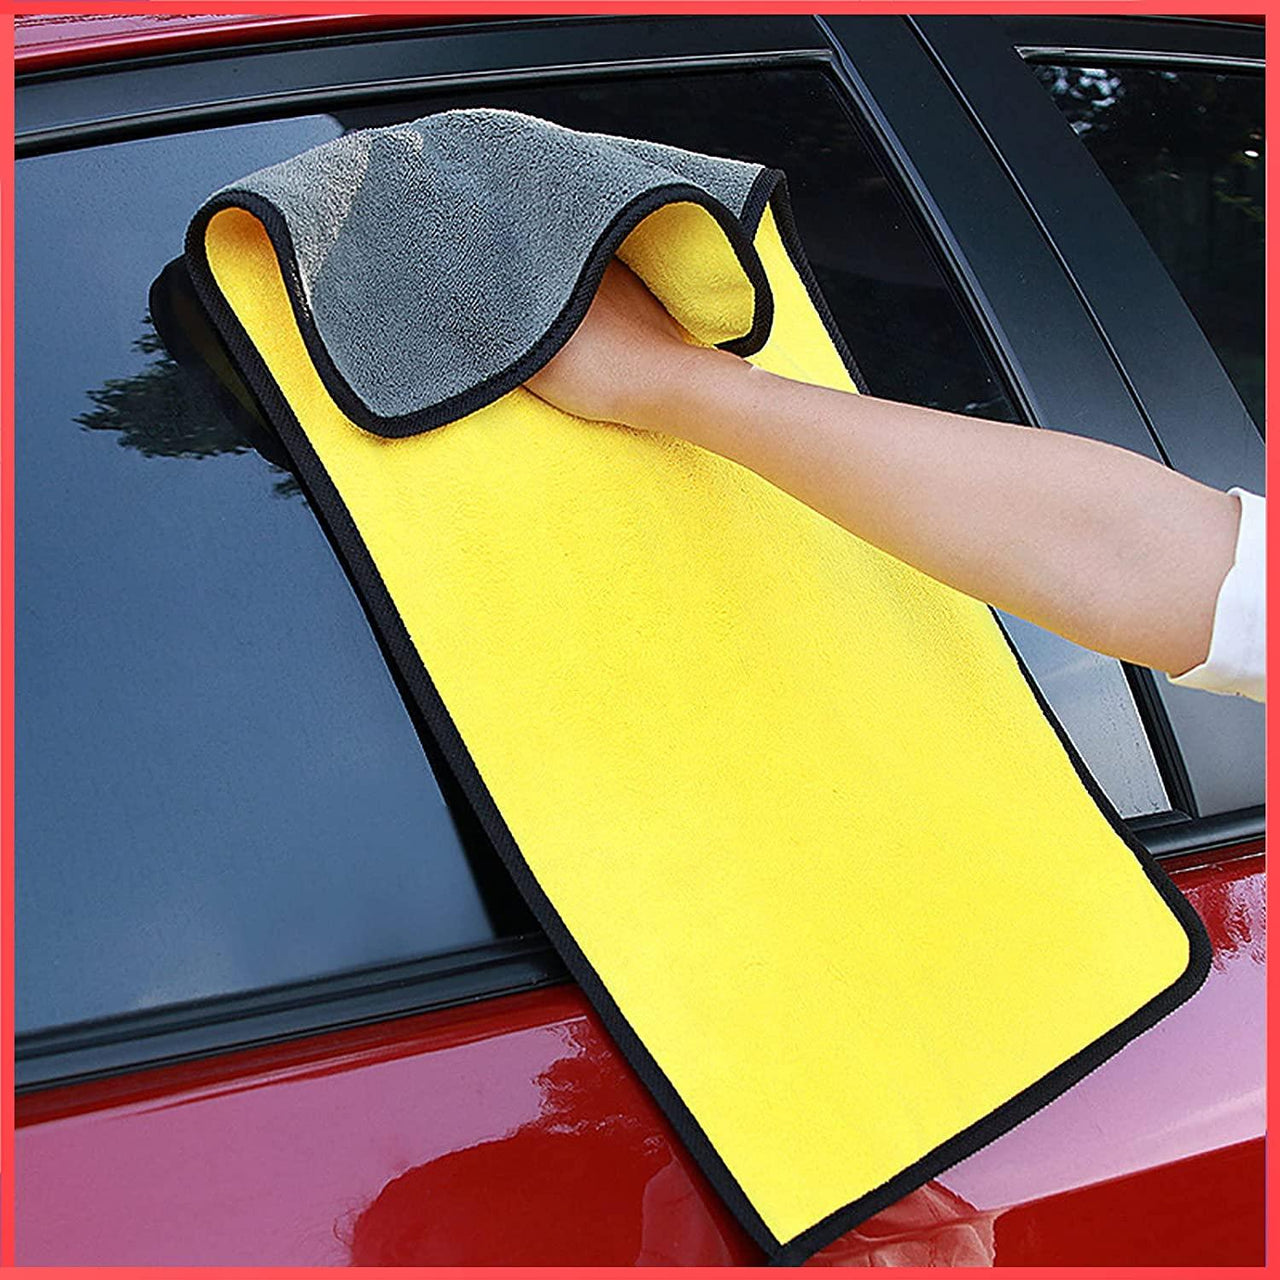 (Buy 1 Get 1 Free) Heavy Microfiber Cloth for Car Cleaning and Detailing (Size - 40x40)